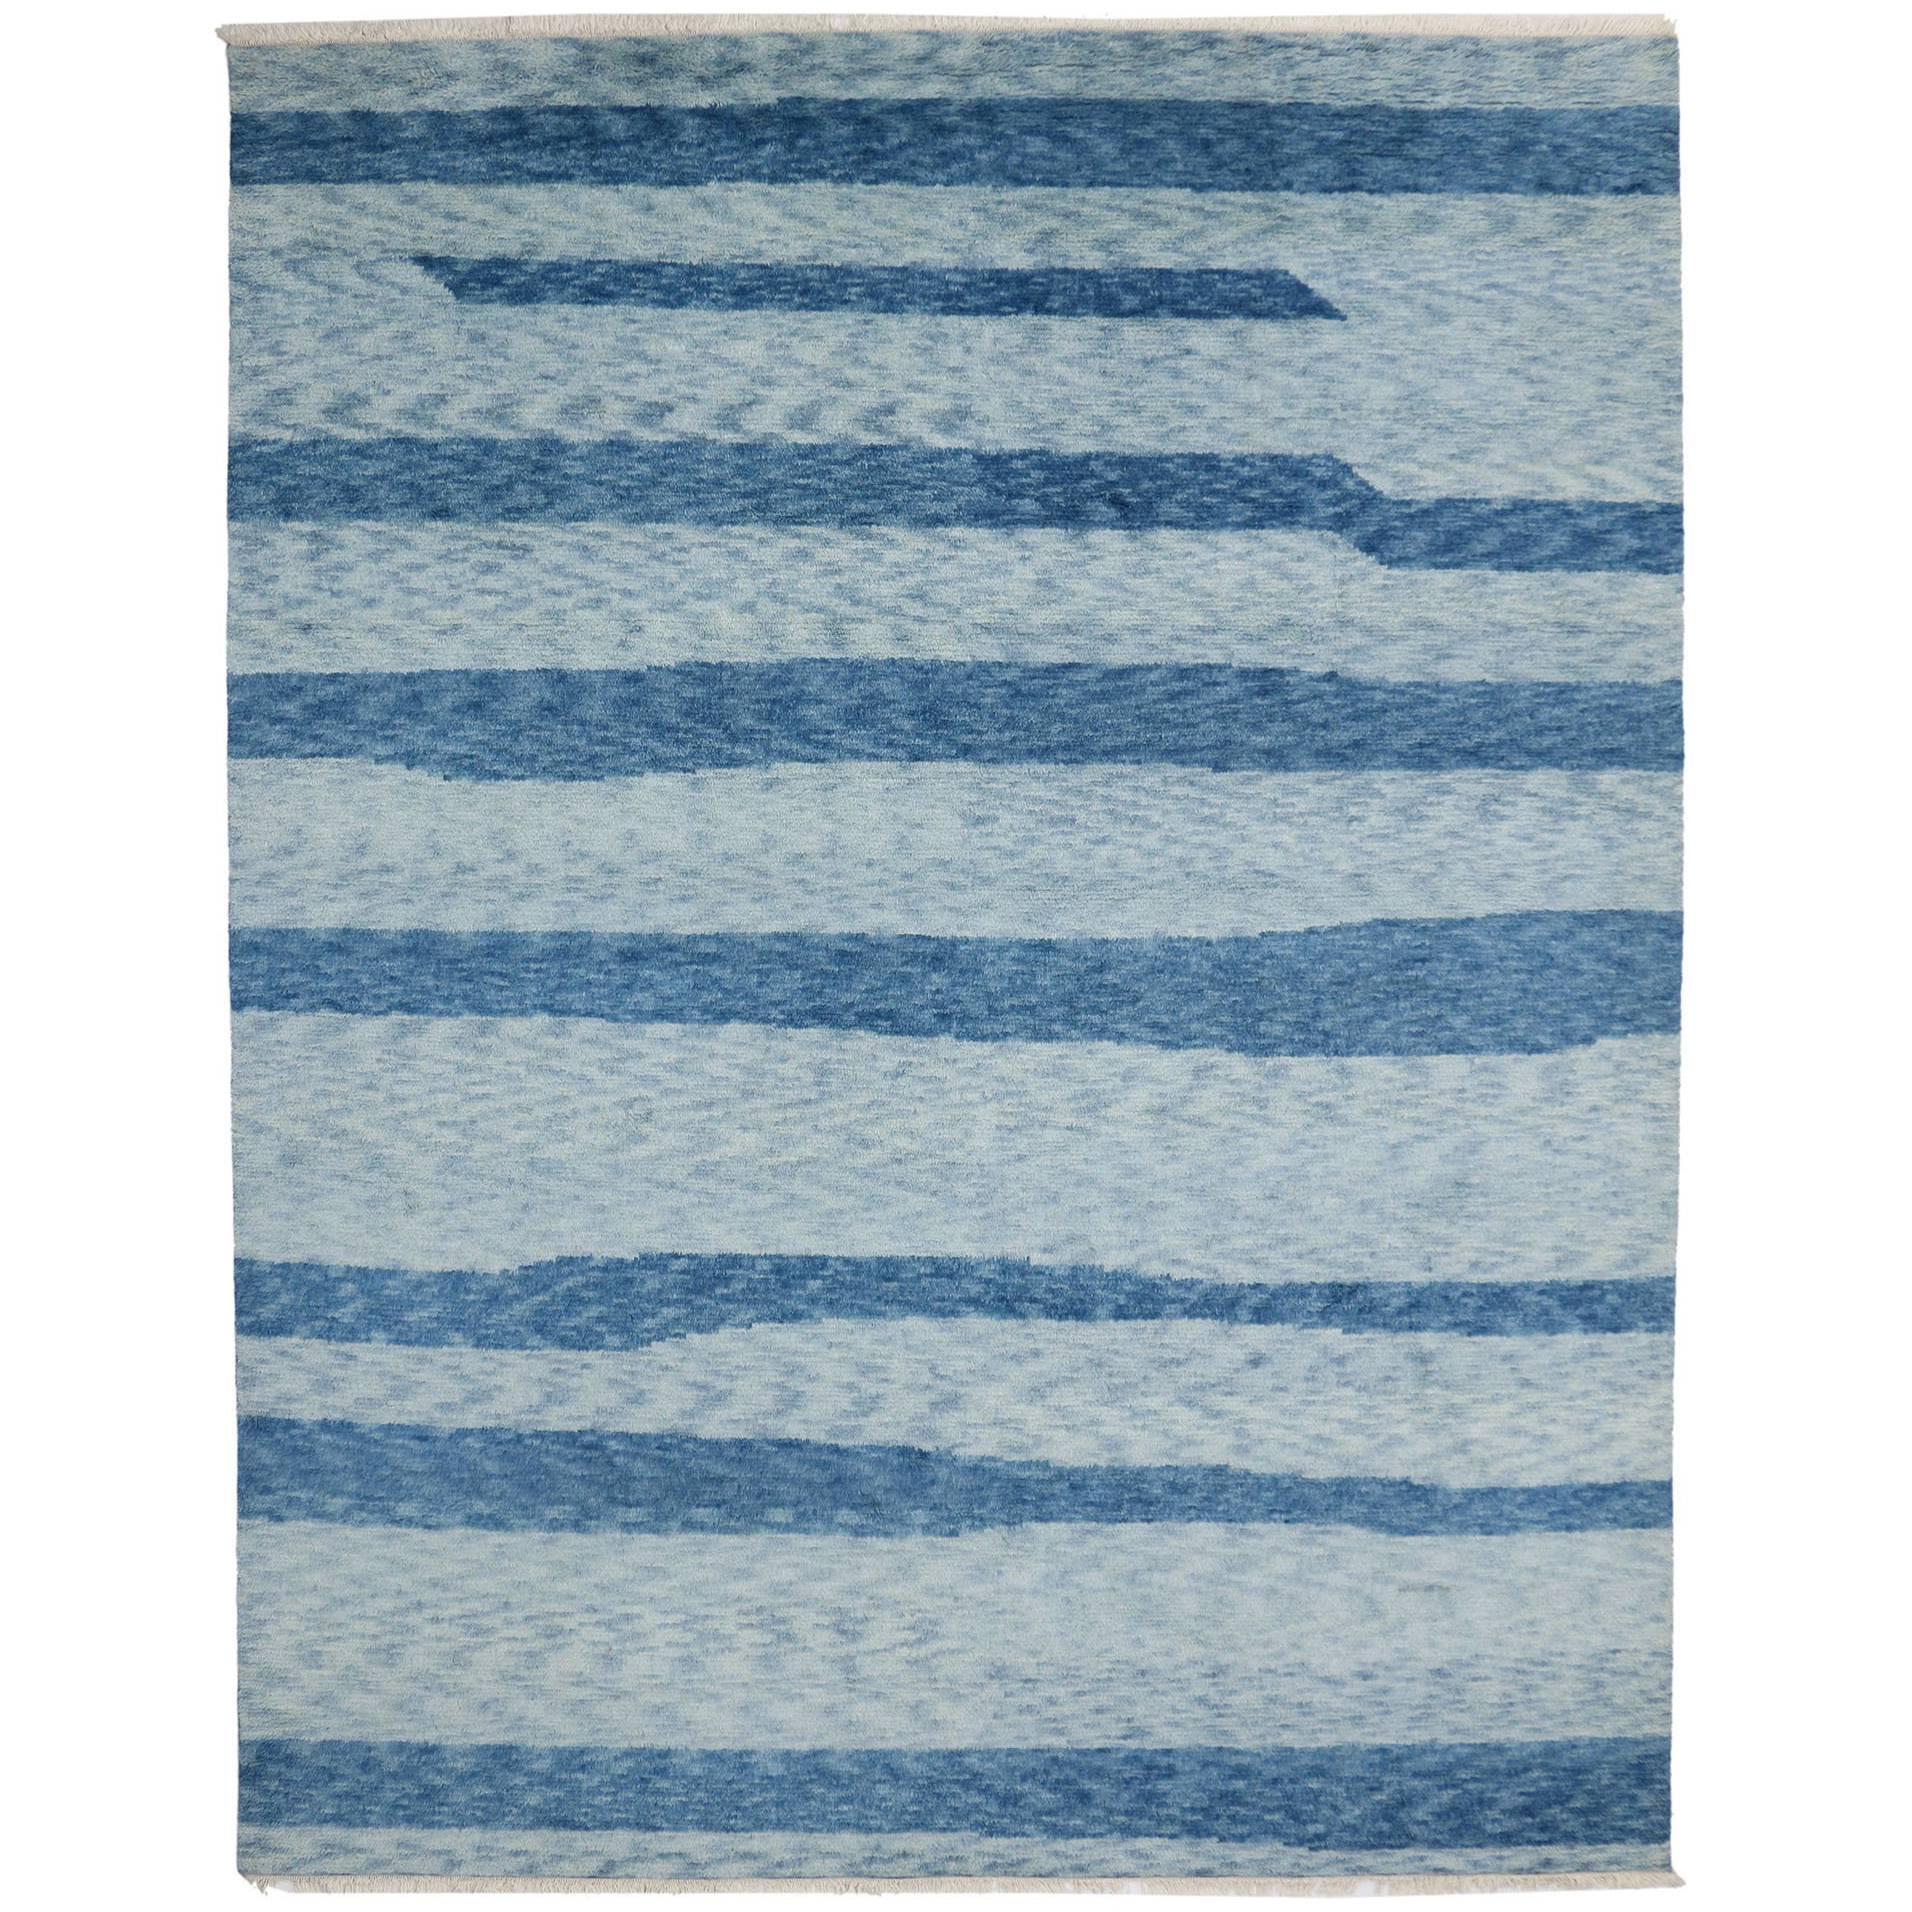 New Contemporary Coastal Moroccan Rug with Postmodern and Beach Hygge Style